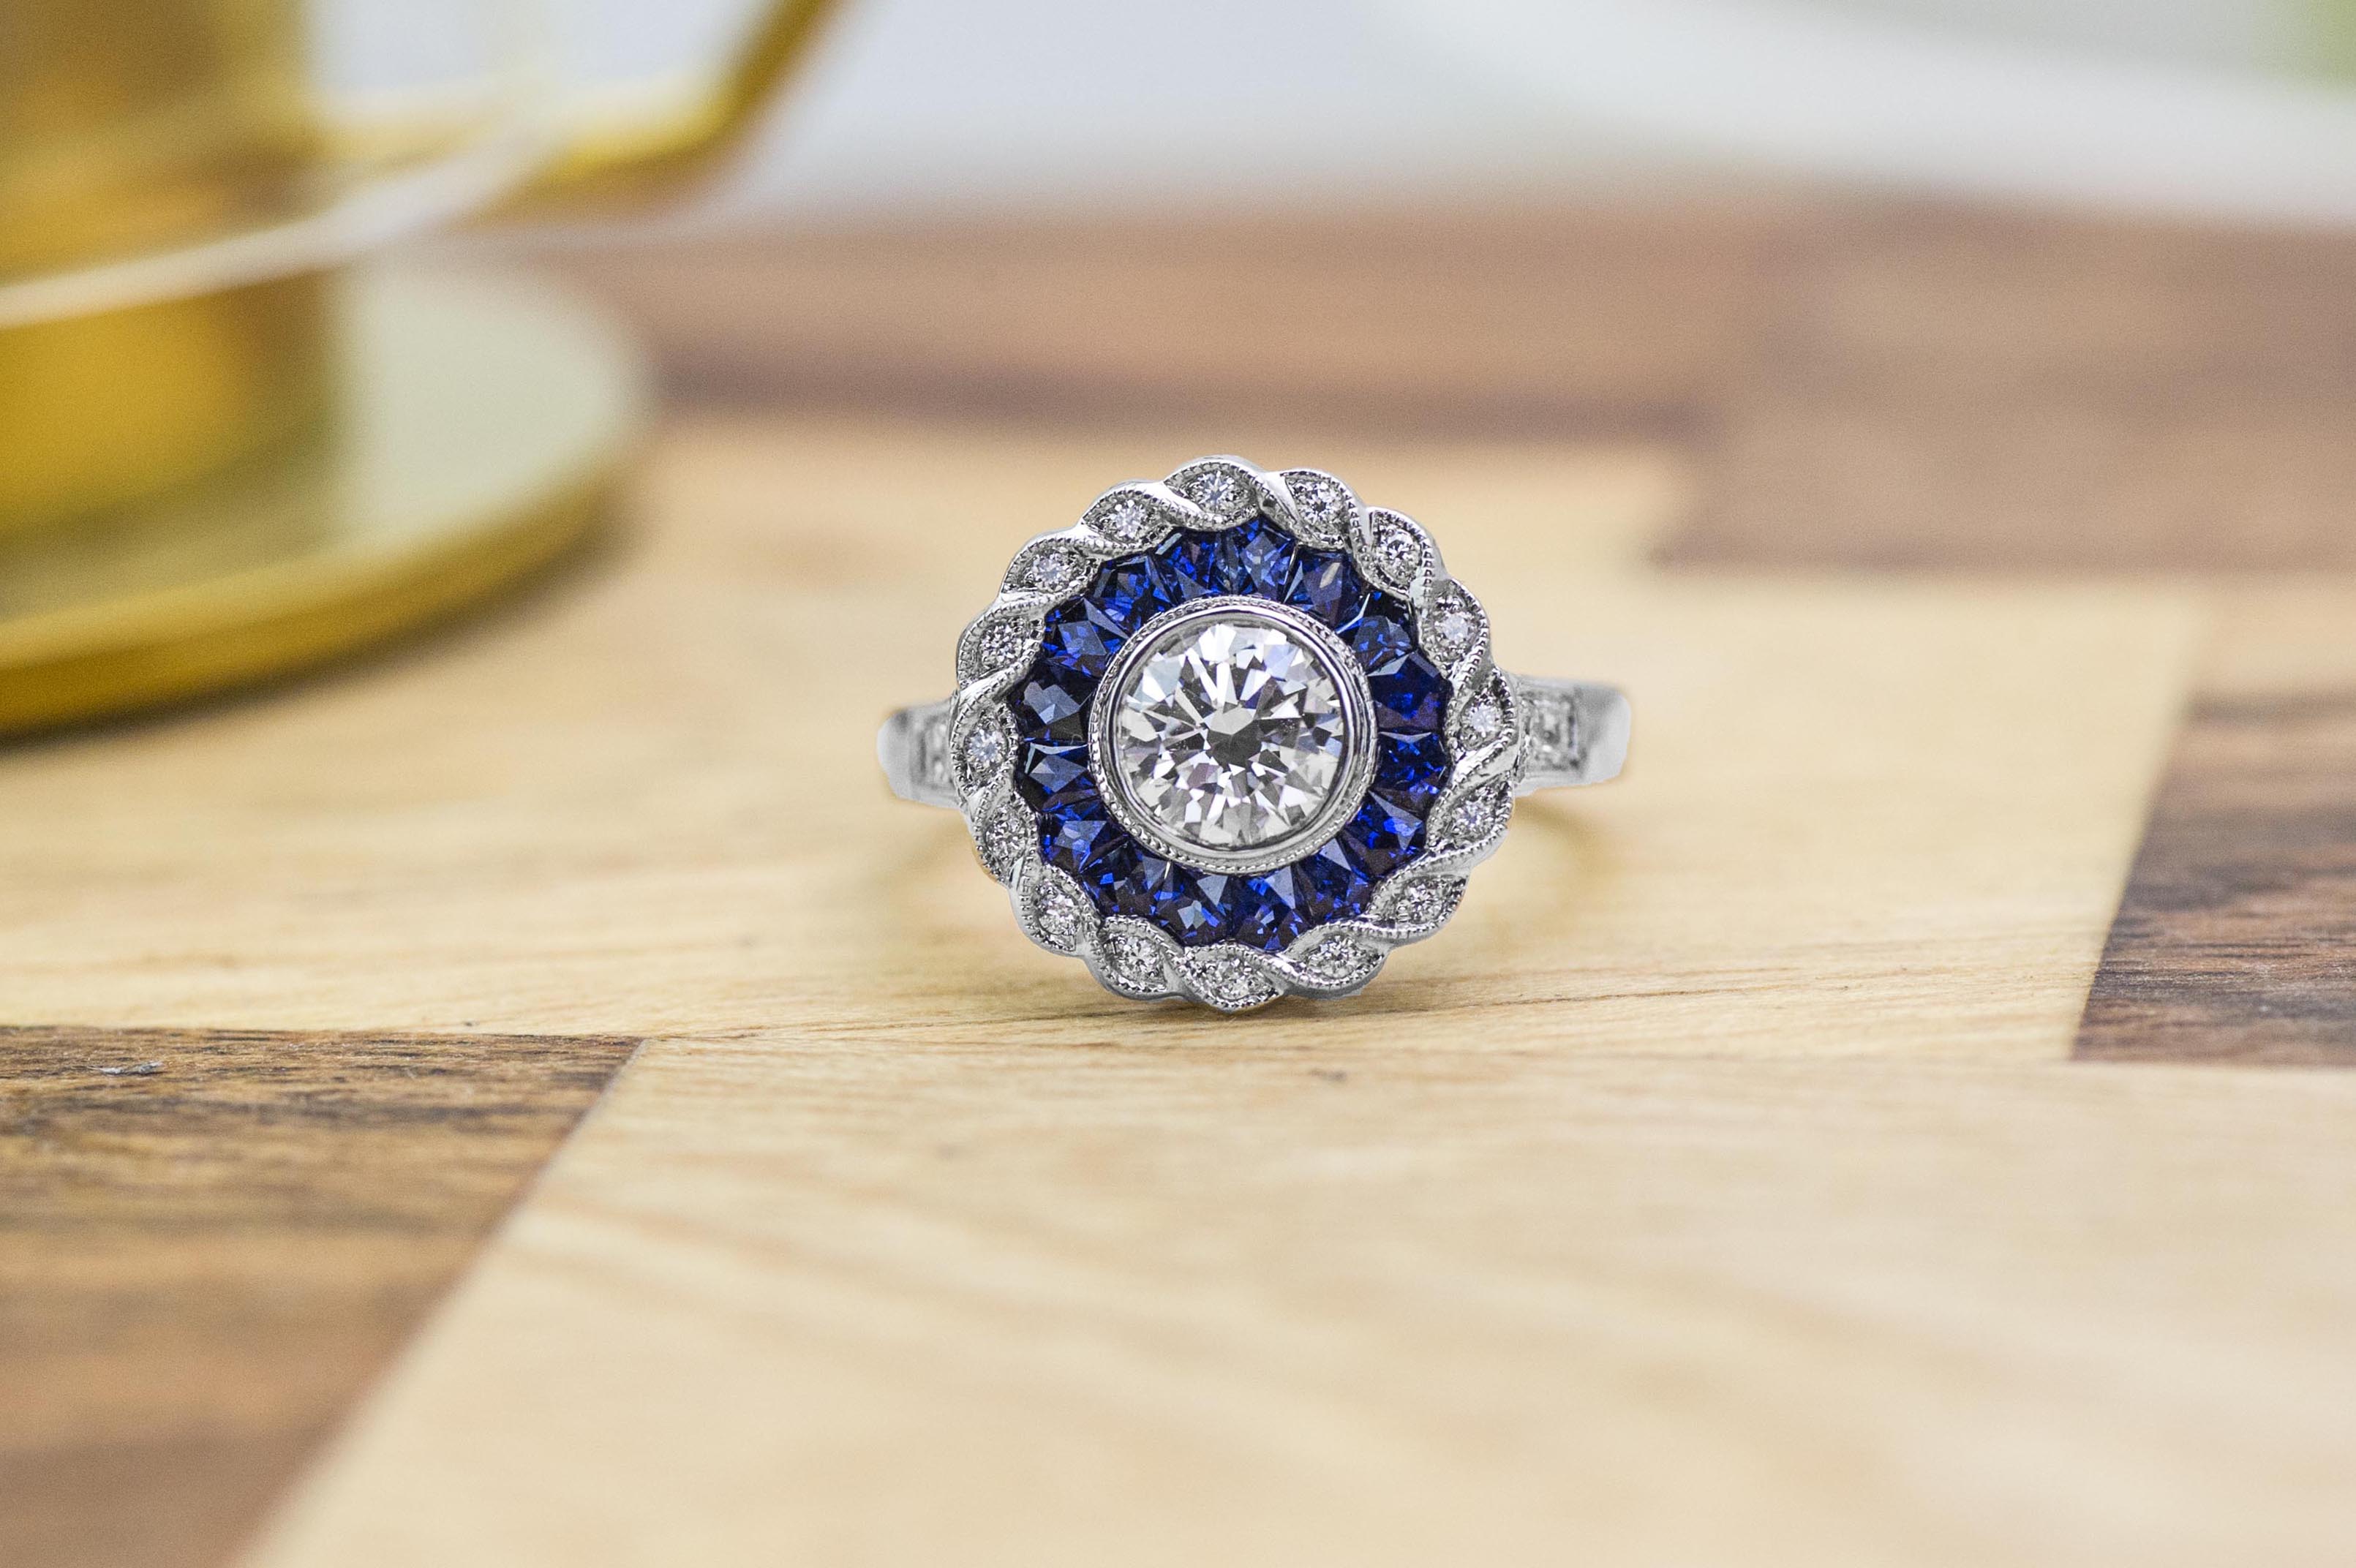 White gold diamond engagement ring with diamond and blue sapphire haloes.